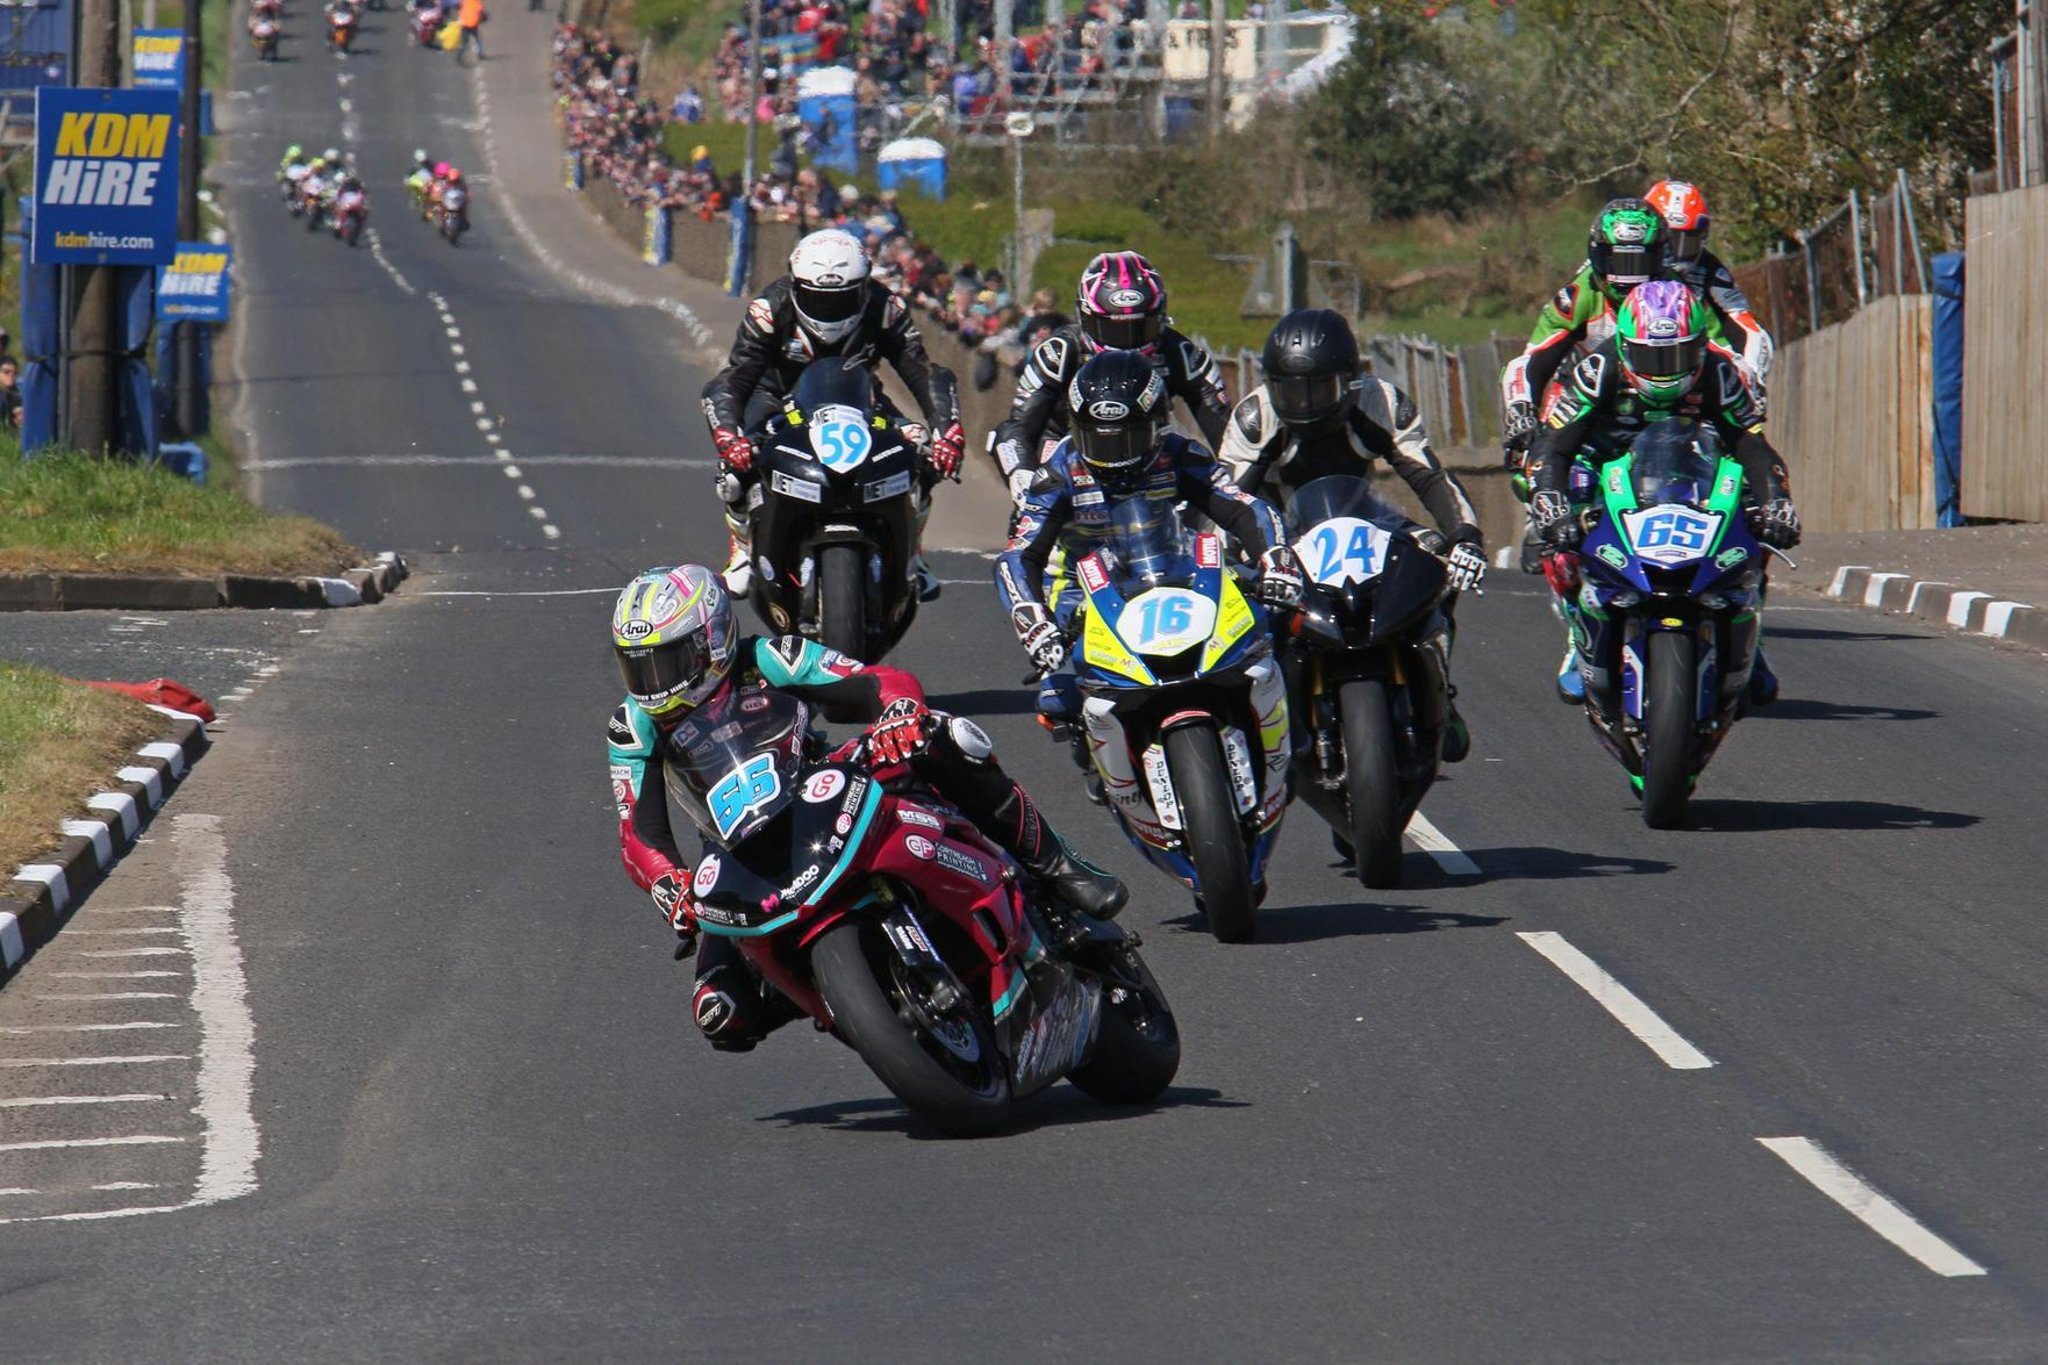 Highs and lows for Adam McLean after victory and crash at Cookstown 100